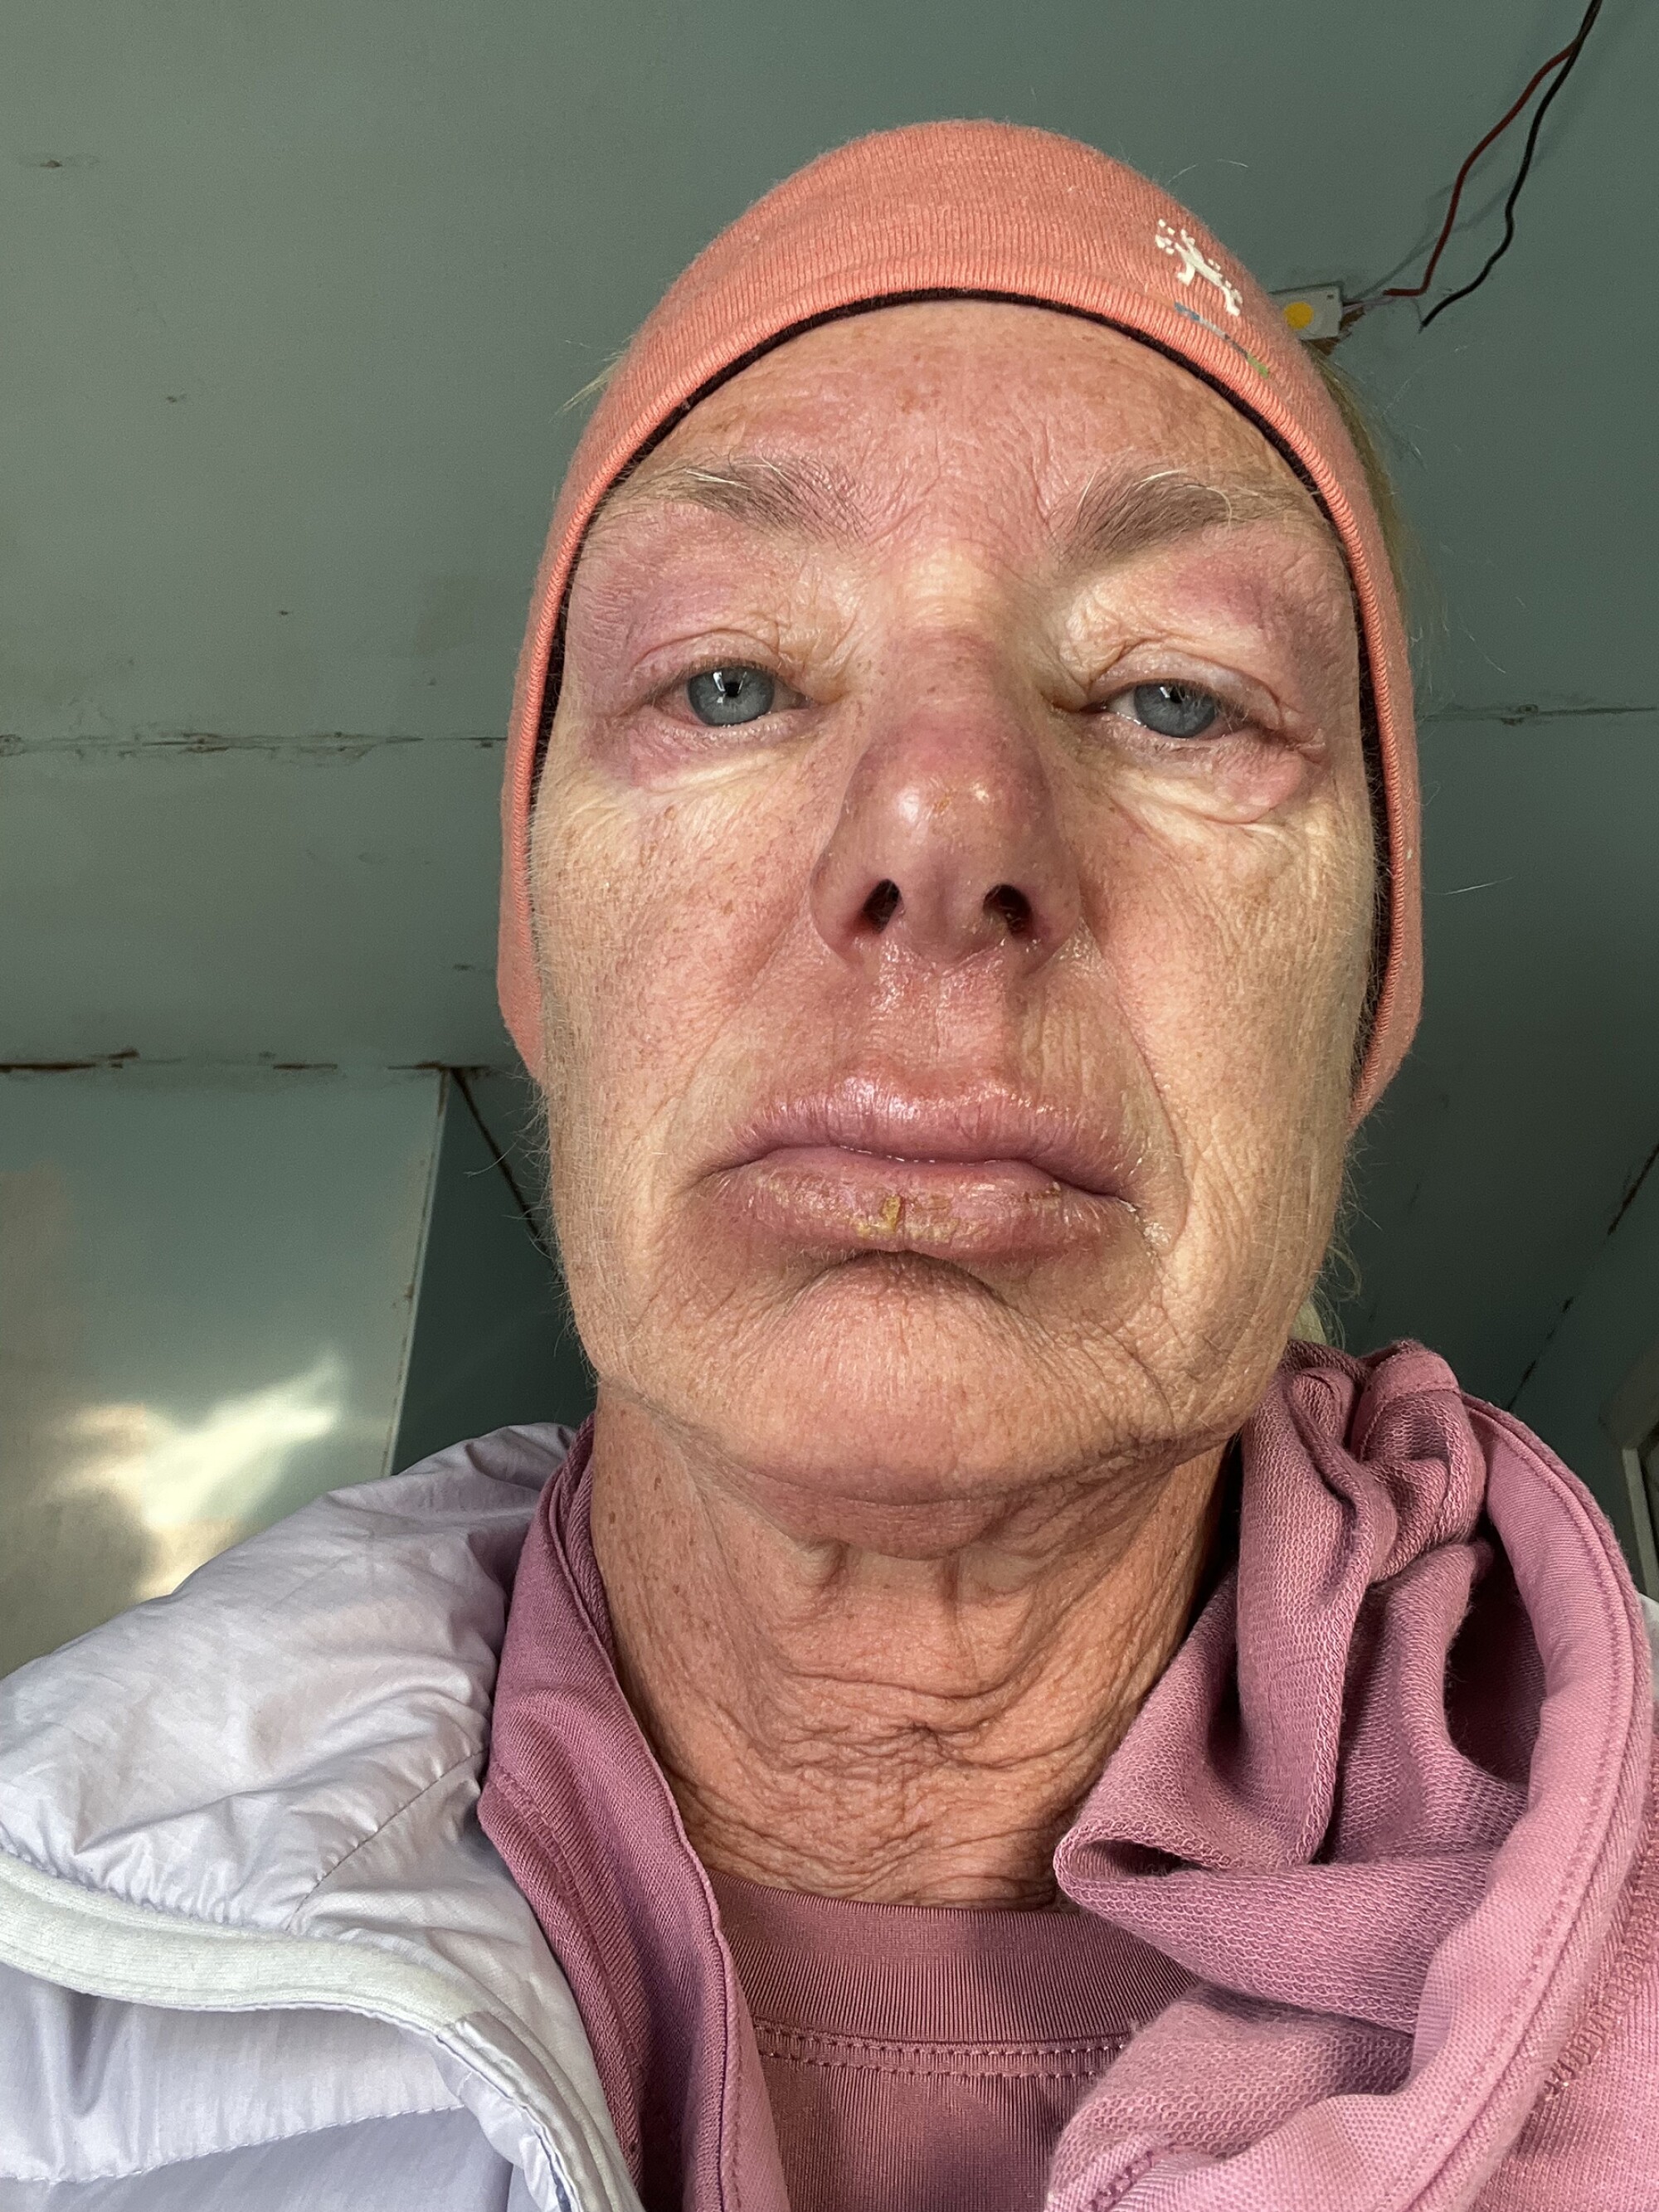 A woman's selfie shows her weary face, red, swollen and chapped from the altitude, cold and wind.